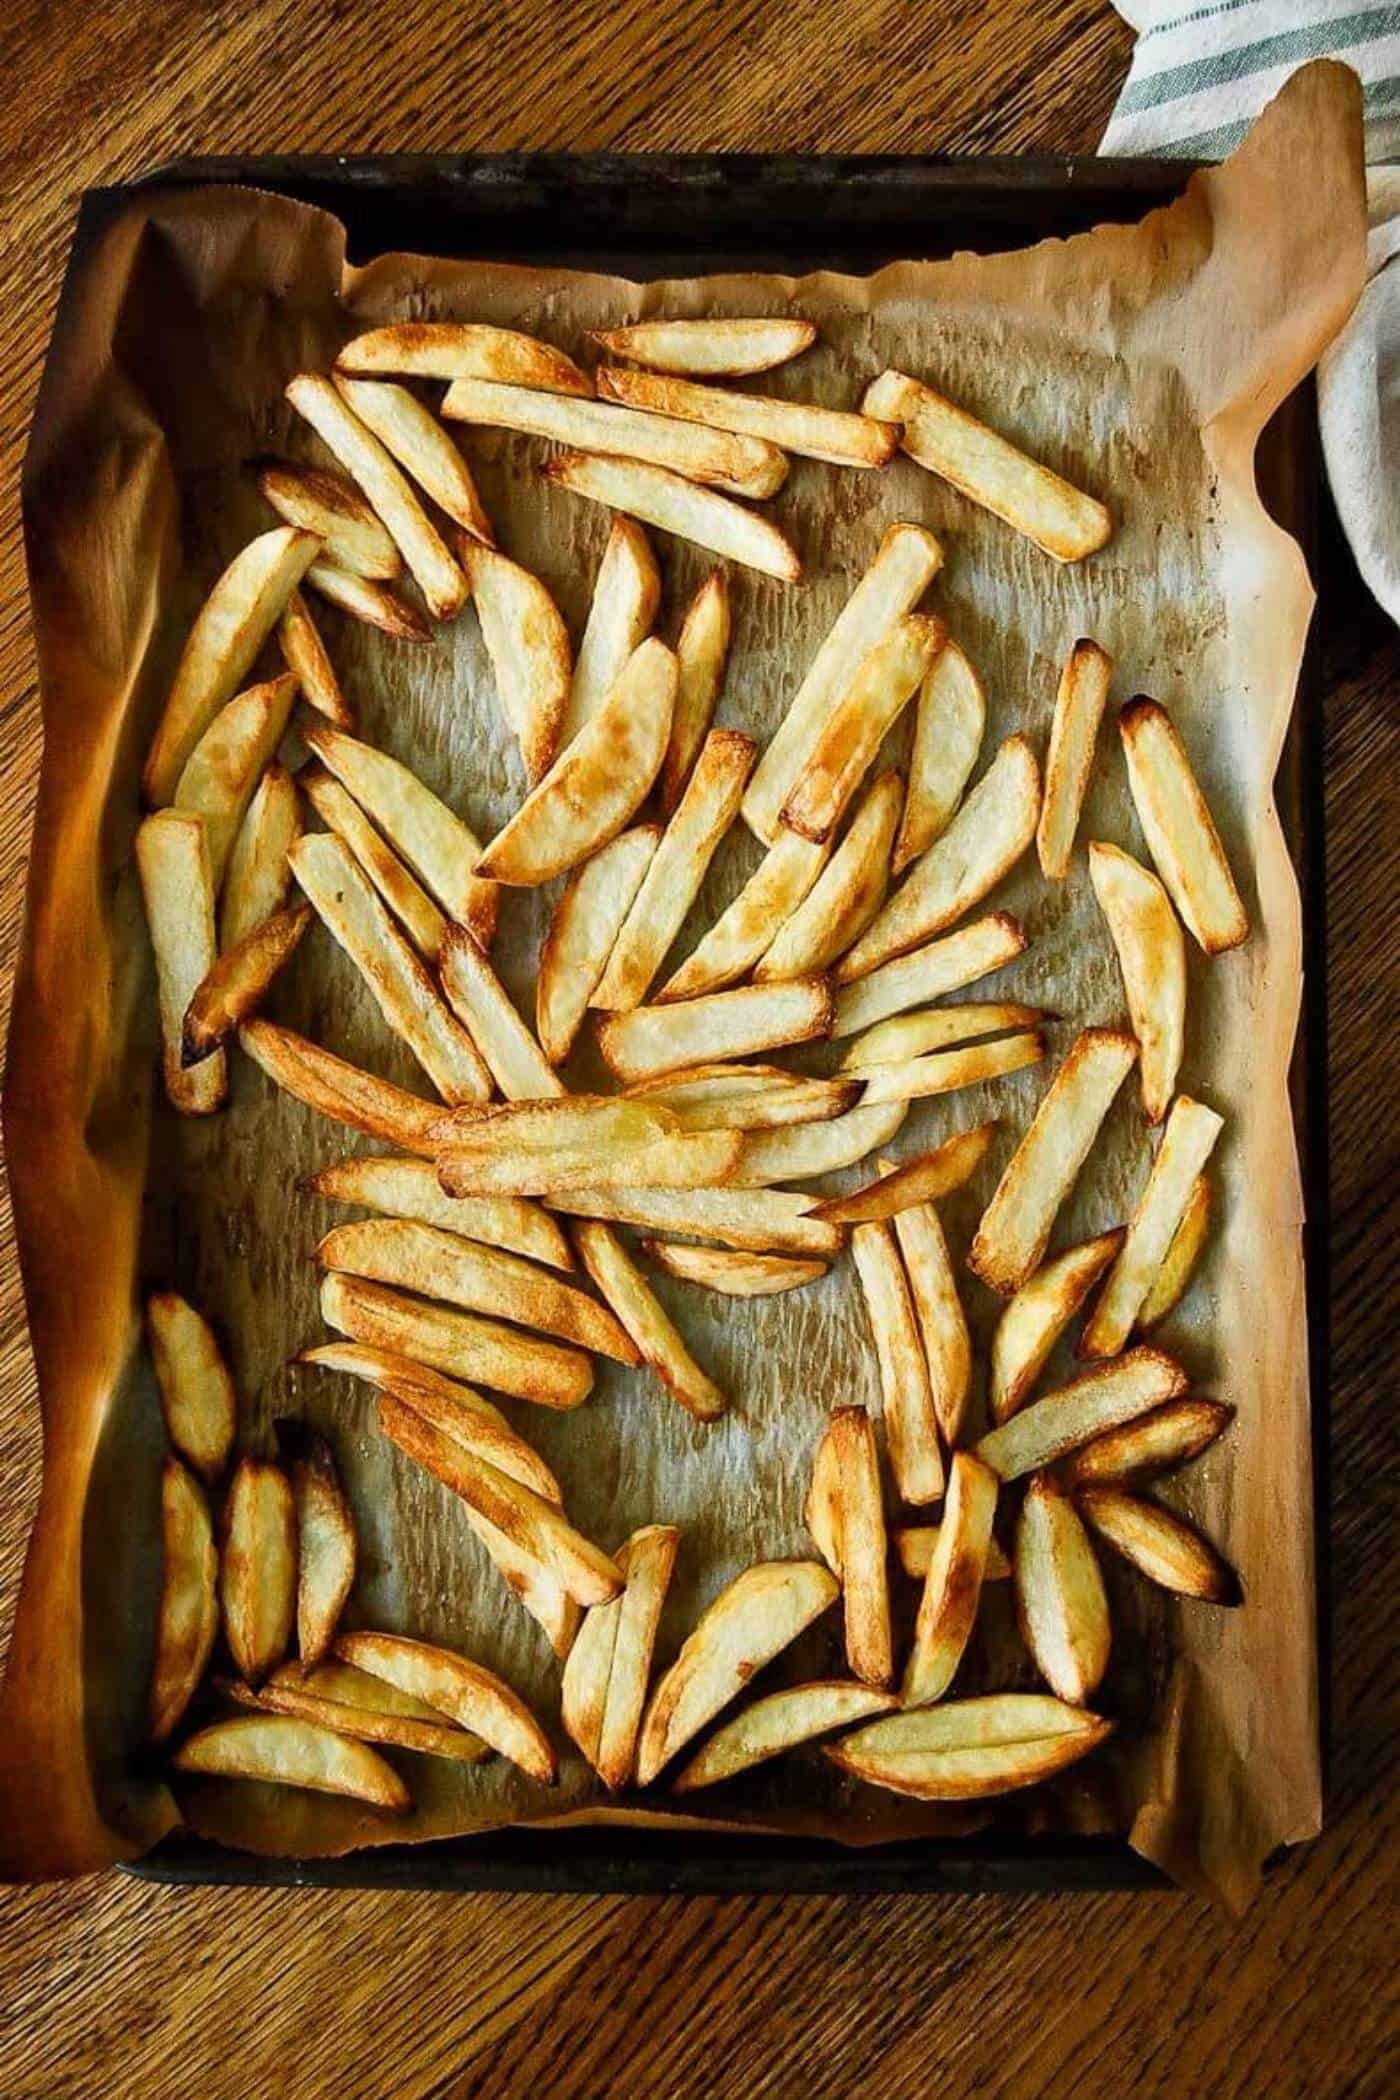 oven baked fries on pan.